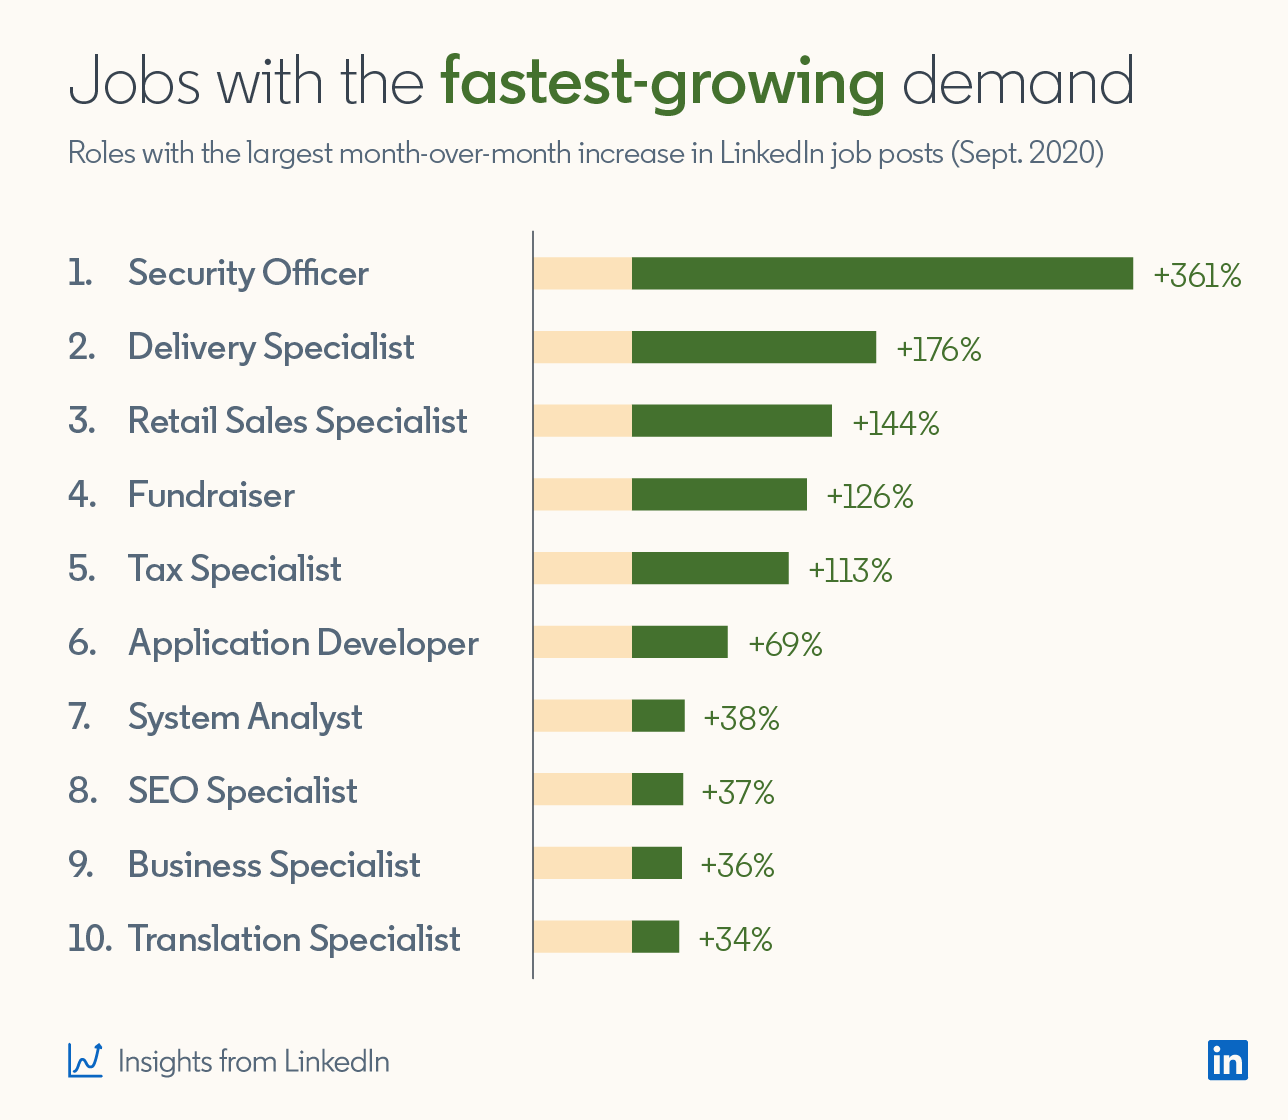 jobs-with-fastest-growing-demand-october-2020-post.png